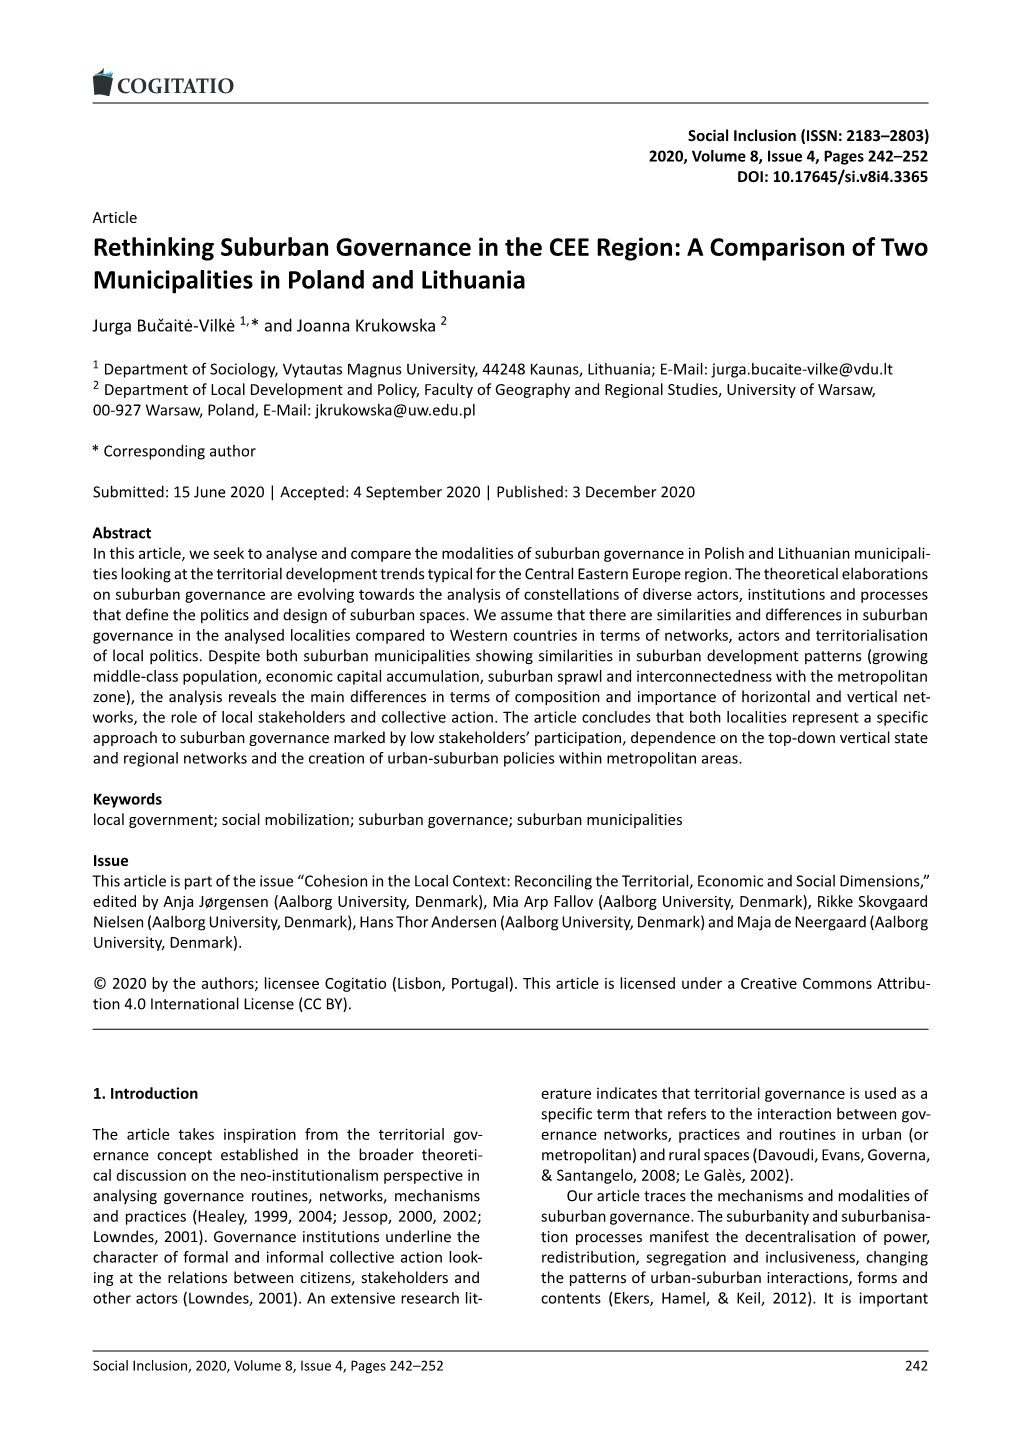 Rethinking Suburban Governance in the CEE Region: a Comparison of Two Municipalities in Poland and Lithuania